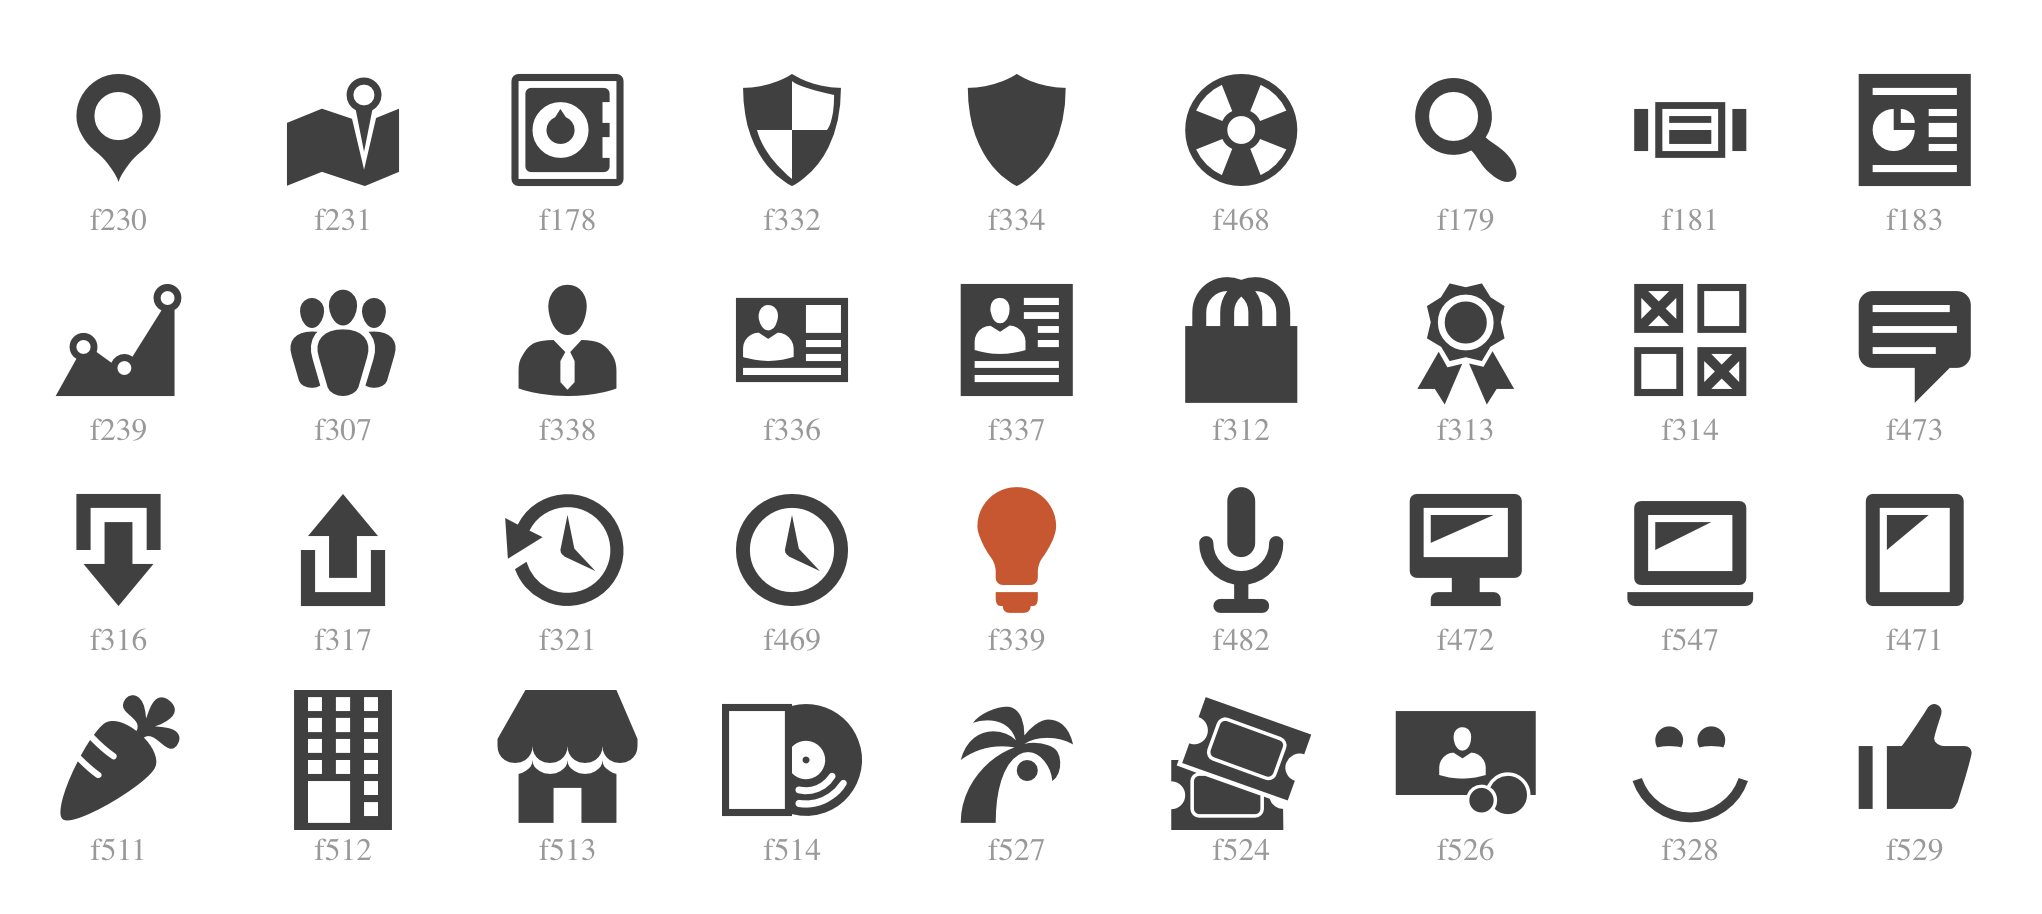 WordPress 5.2 Will Add 13 New Icons to the Dashicon Library